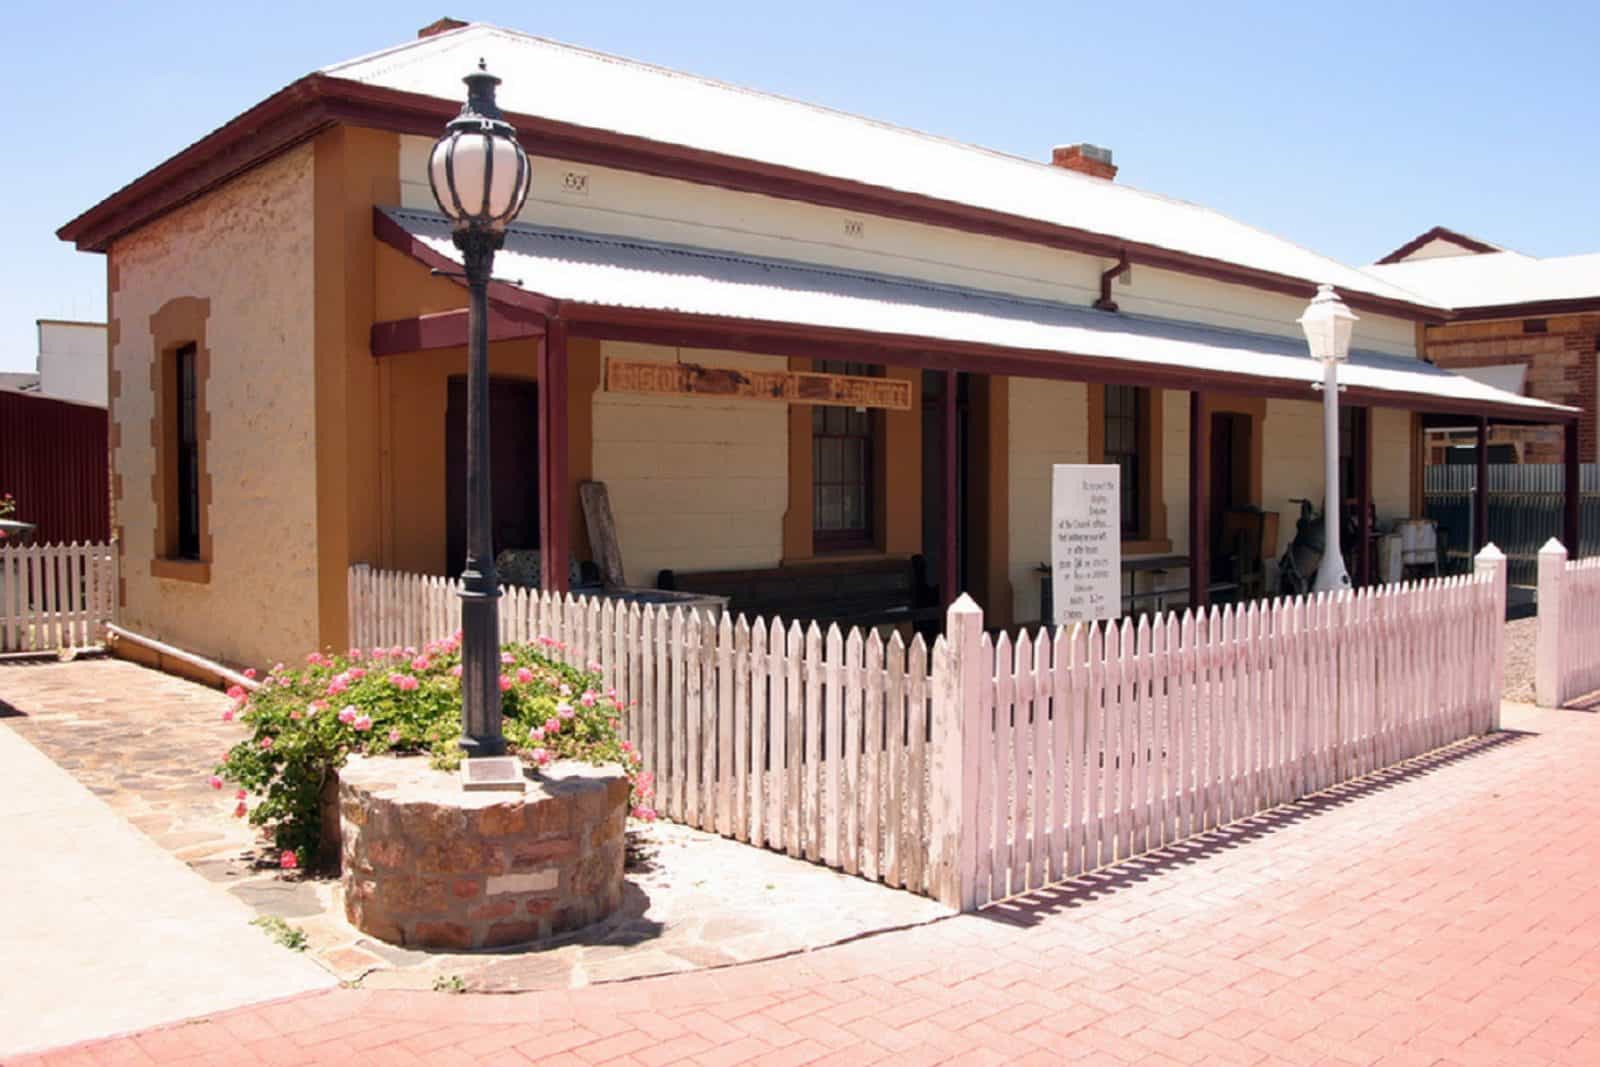 The Franklin Harbour Historical Museum